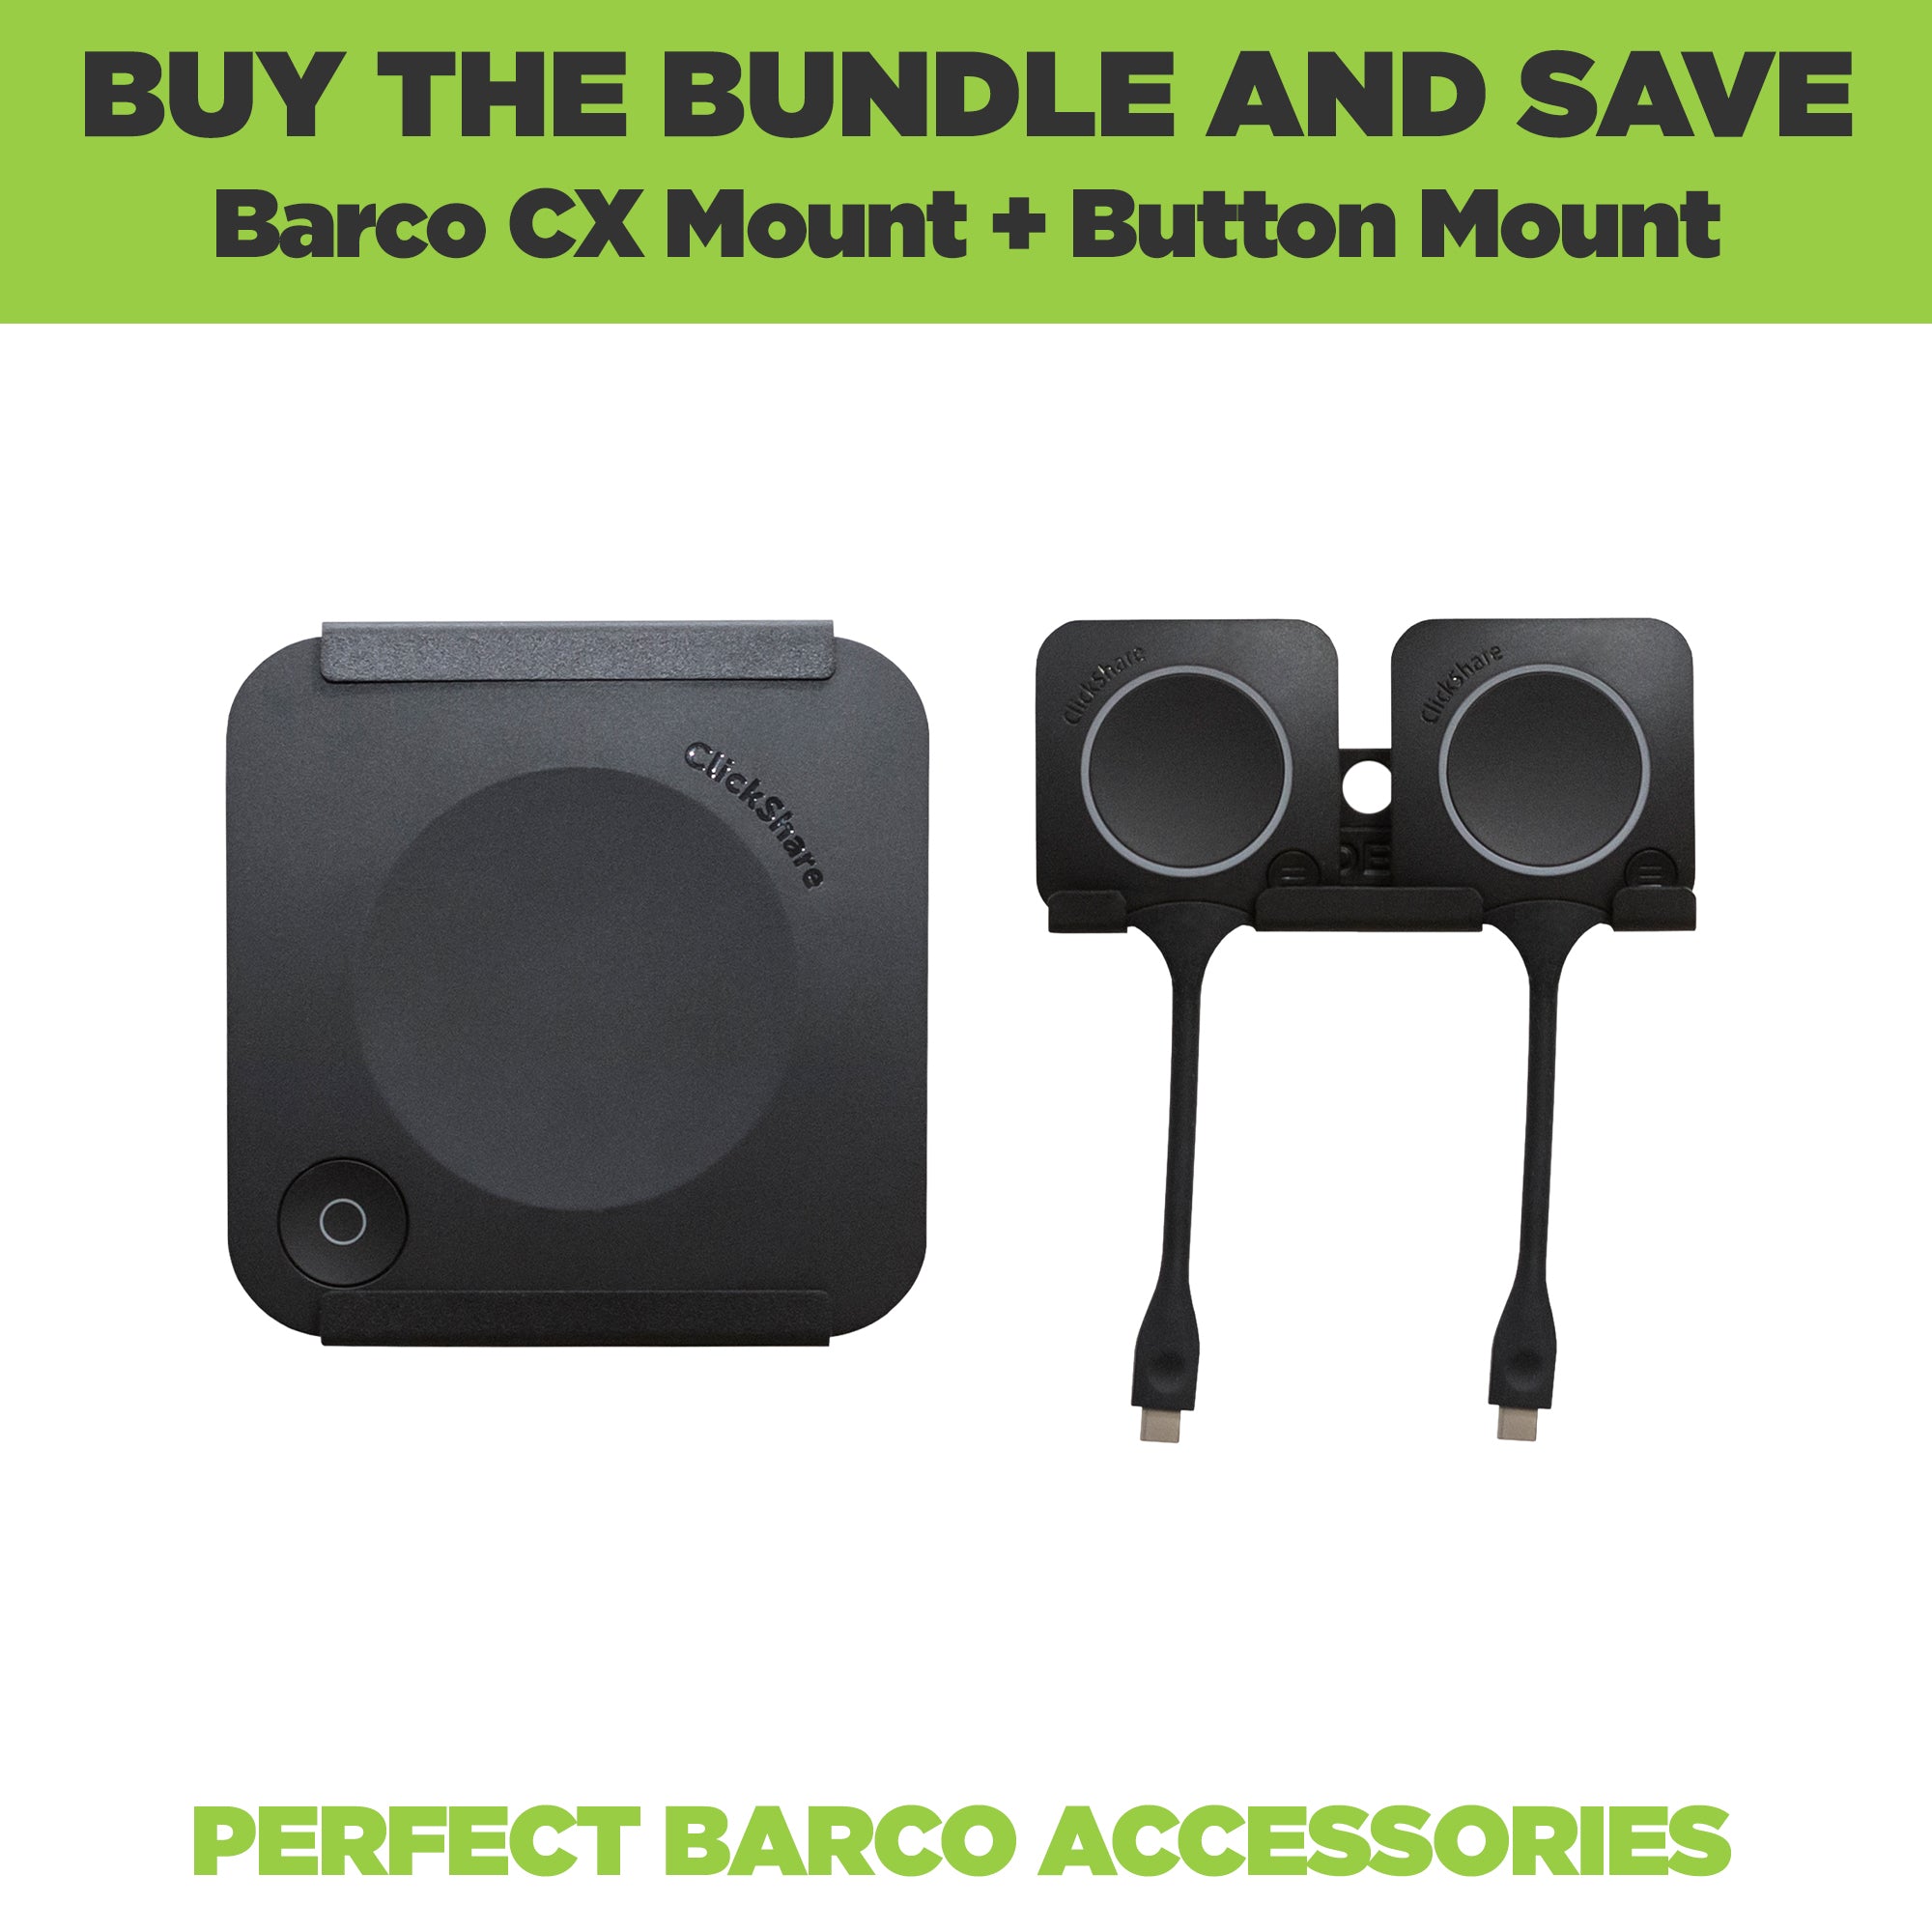 HIDEit Mounts Wall Mount Bundle for Barco devices includes a wall mount for the Barco CX Presentation Devices and a wall mount for 2 ClickShare Buttons.